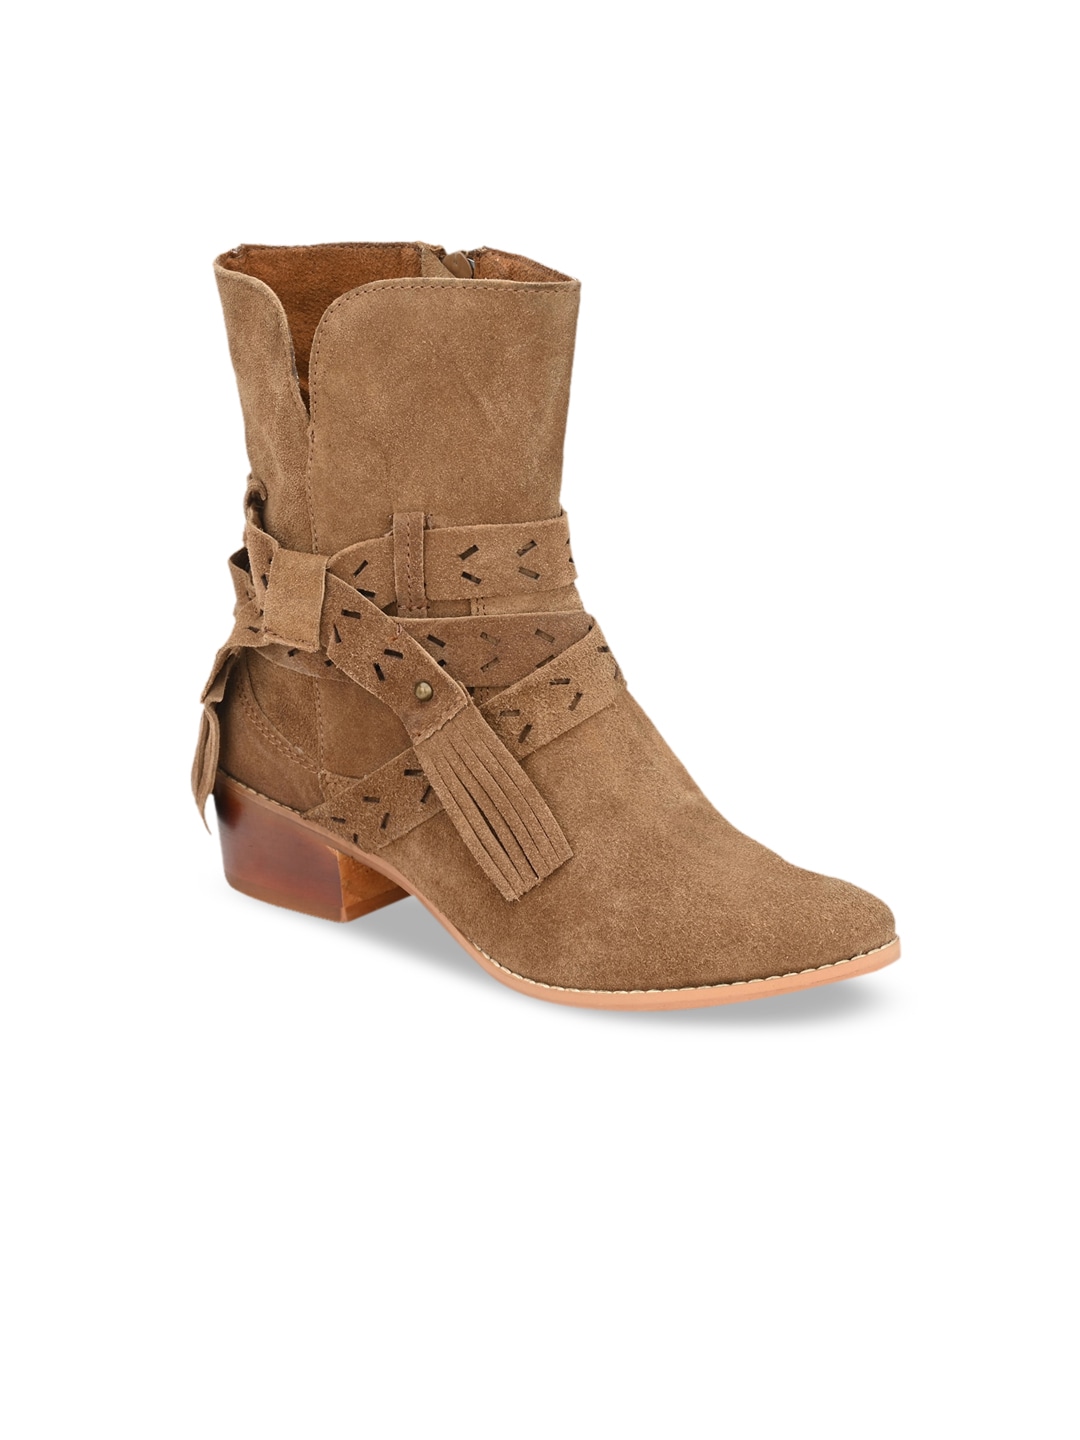 Zebba Women Tan Brown Embellished Heeled Boots Price in India